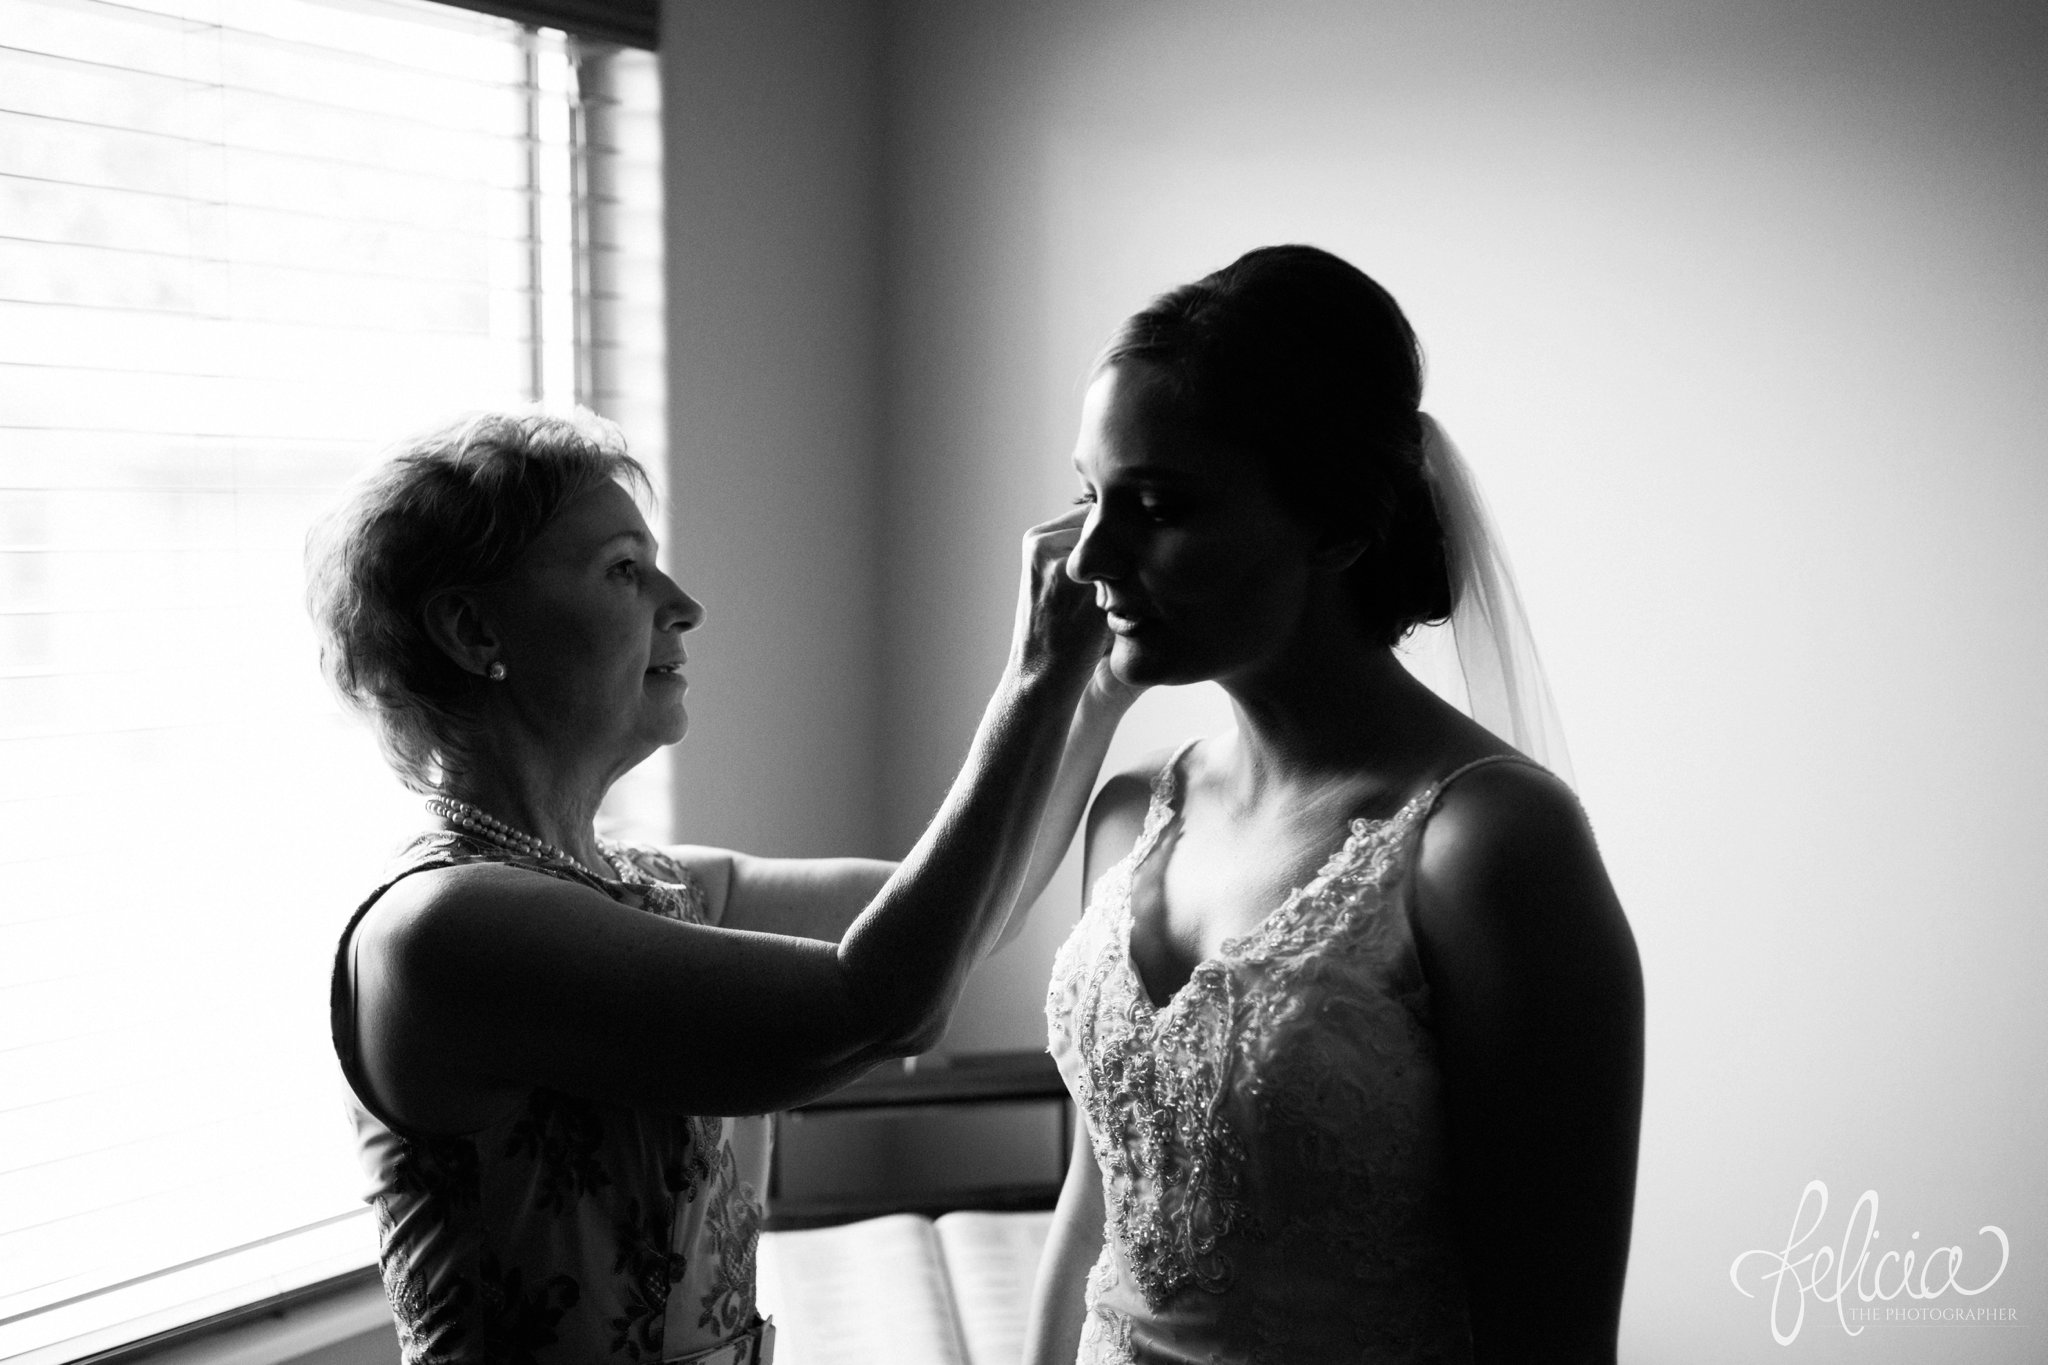 Black and White | Wedding | Wedding Photography | Wedding Photos | Travel Photographer | Images by feliciathephotographer.com | Getting Ready | Wedding Prep | Putting on Dress | Mother of the Bride | Candid 